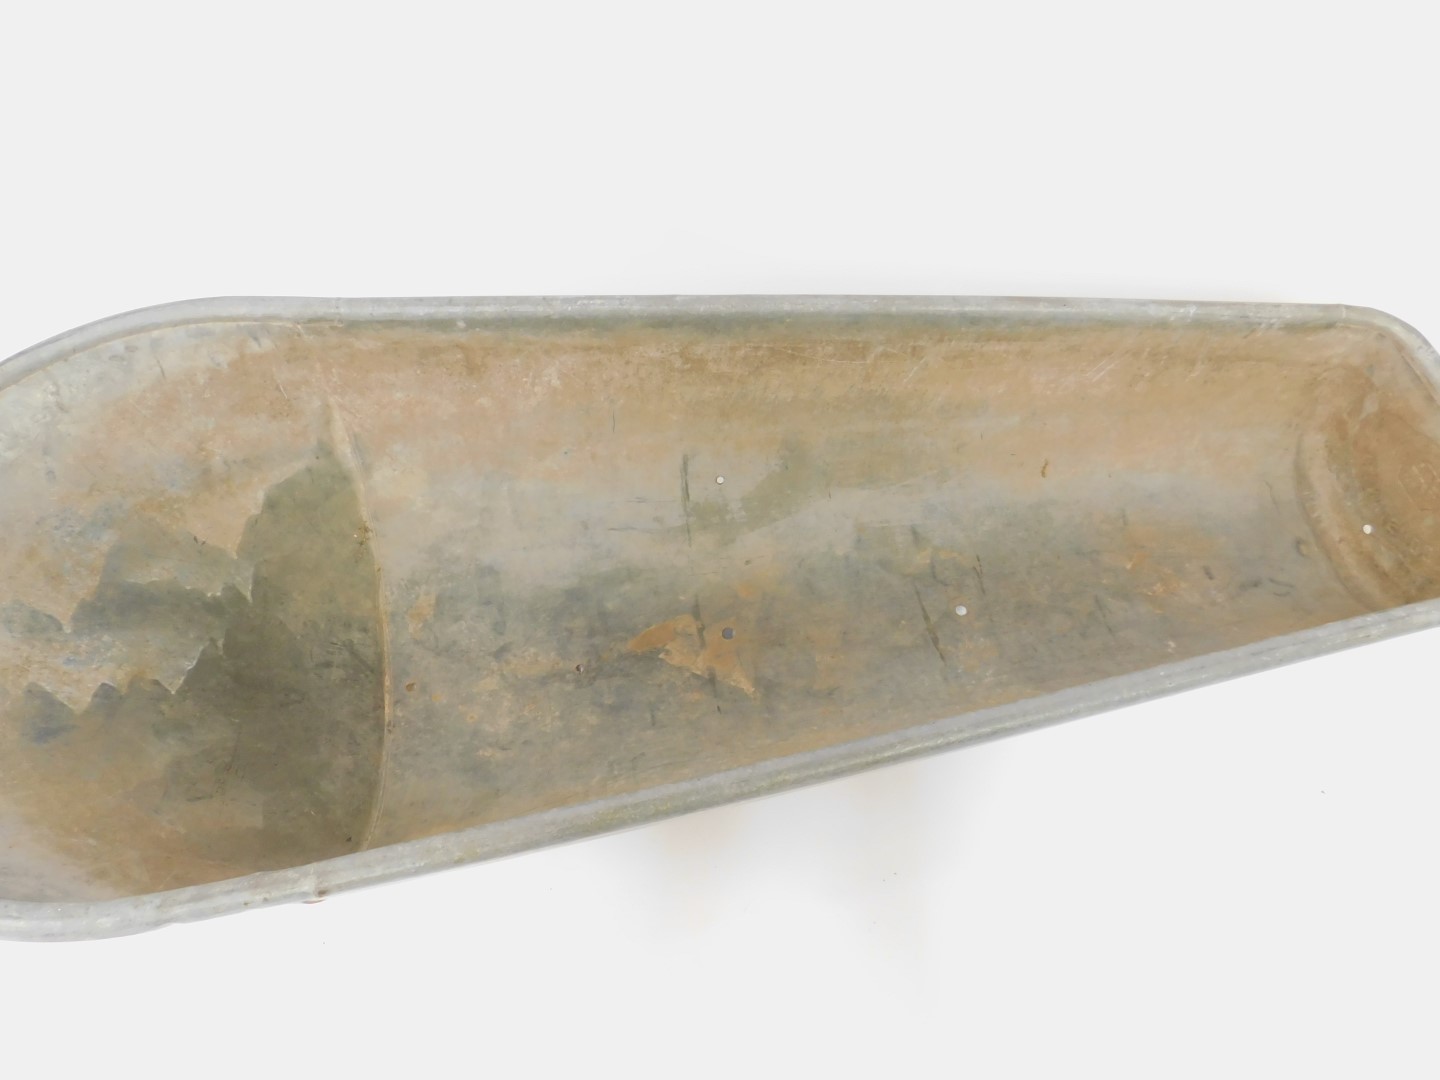 A Constantia retro galvanized coffin shaped roll-top bath, with embossed makers mark CONSTANTIA SA - Image 2 of 3